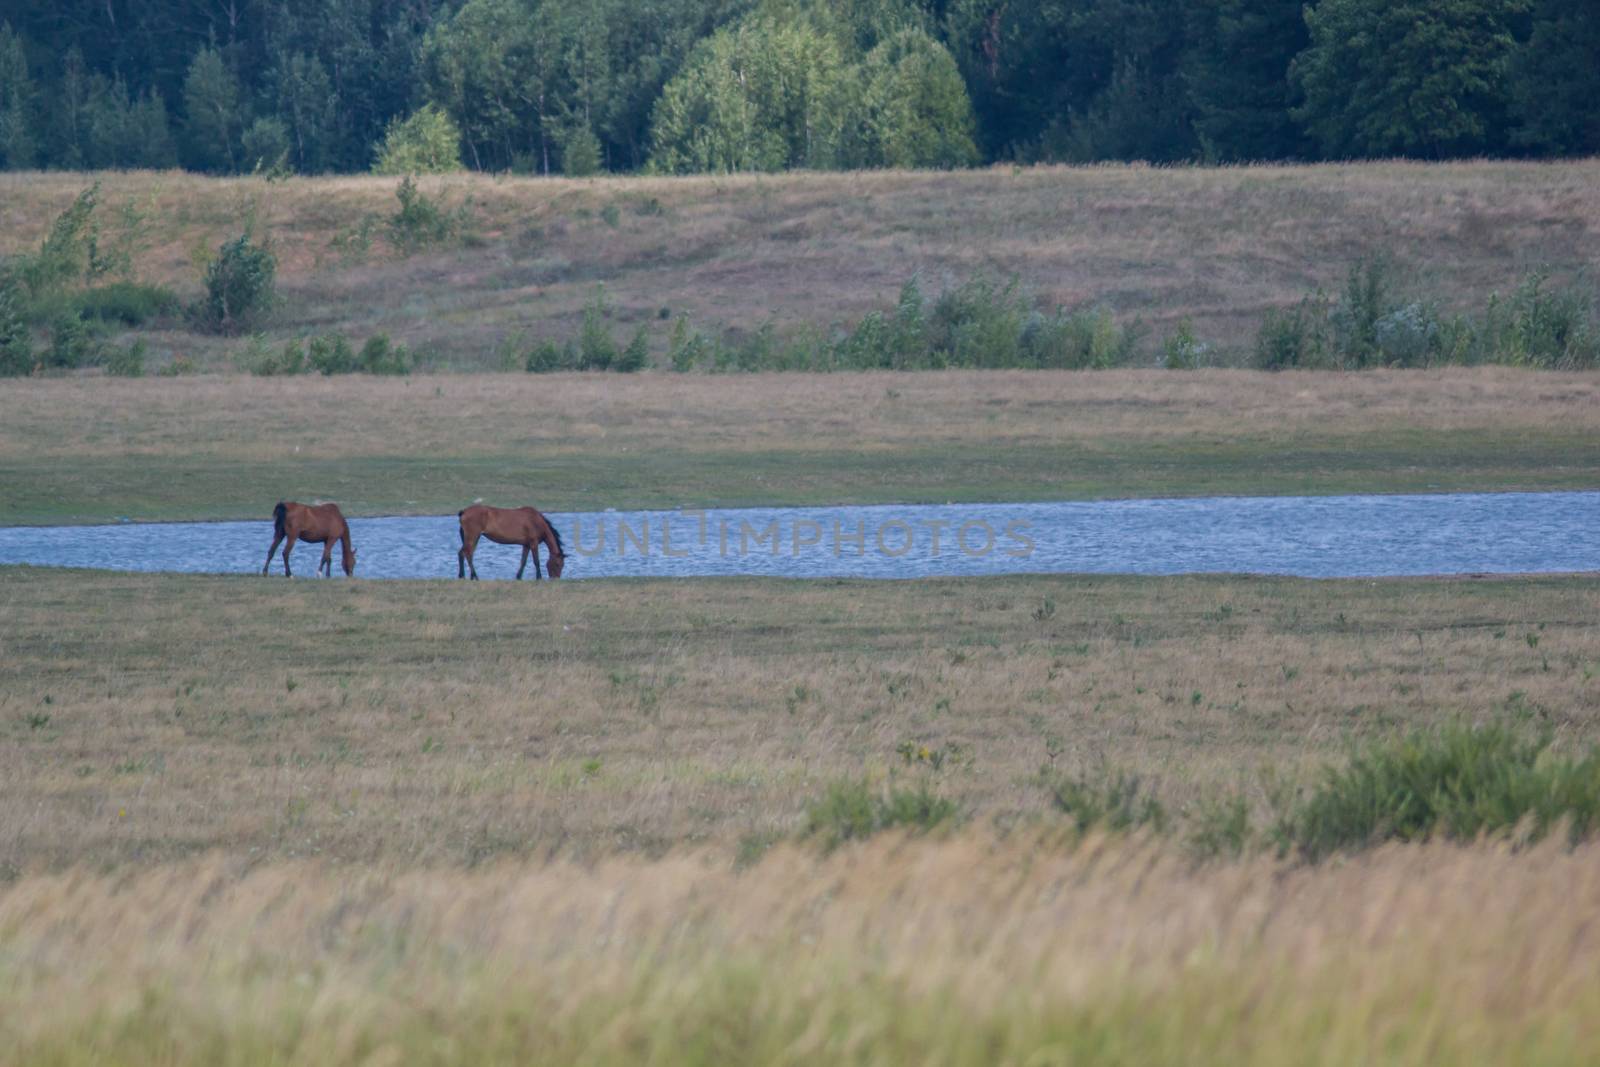 Horse on a background of lake, in nature landscape by Studia72